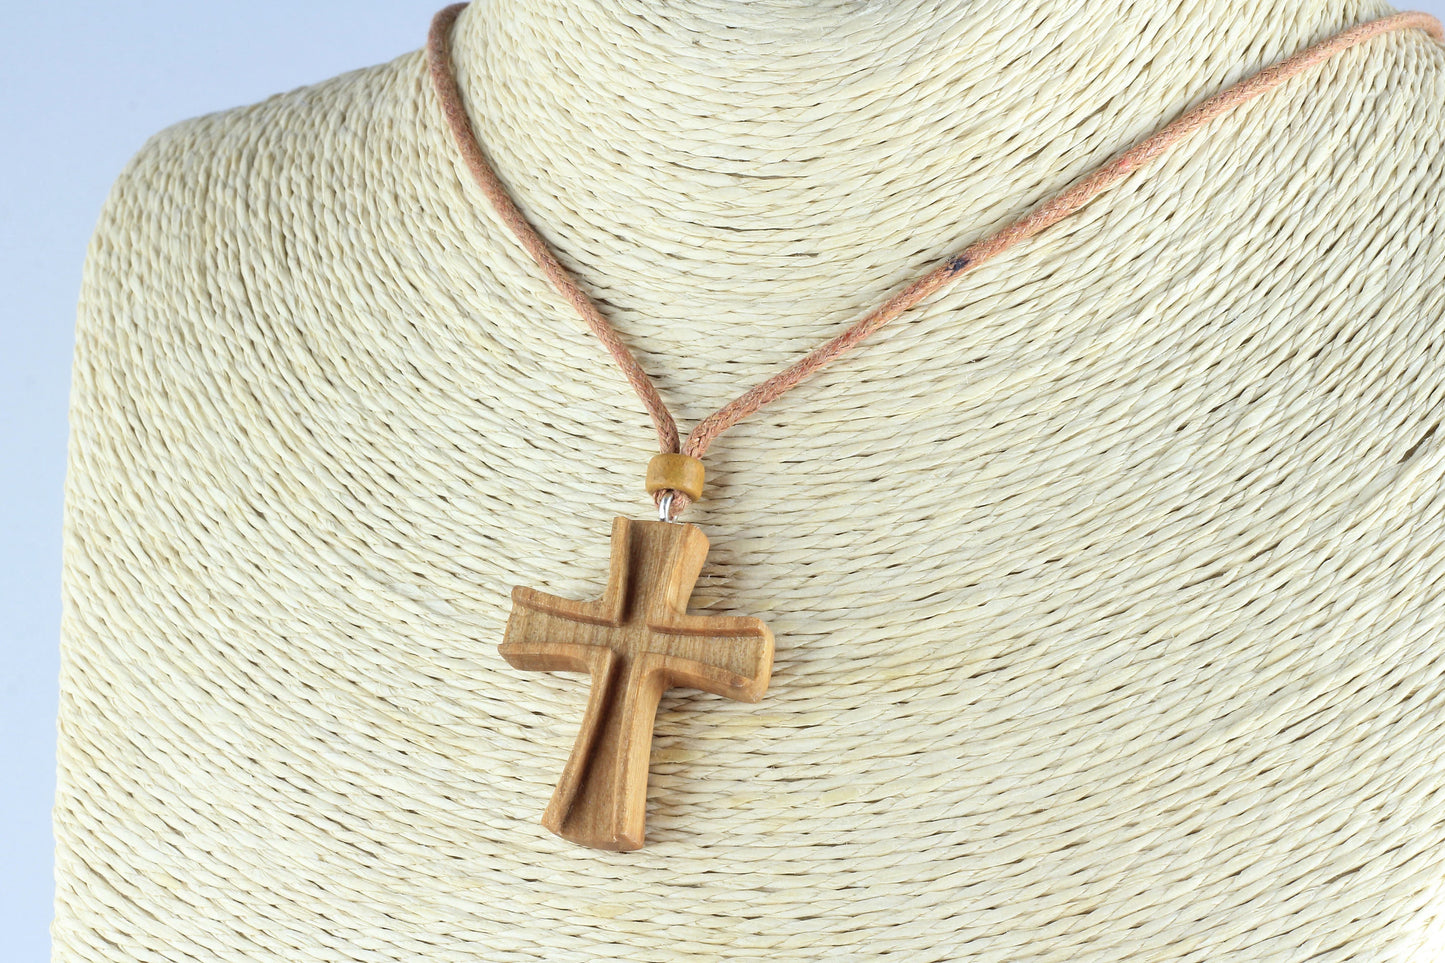 Handcrafted Wooden Cross Pendant with Adjustable Cord